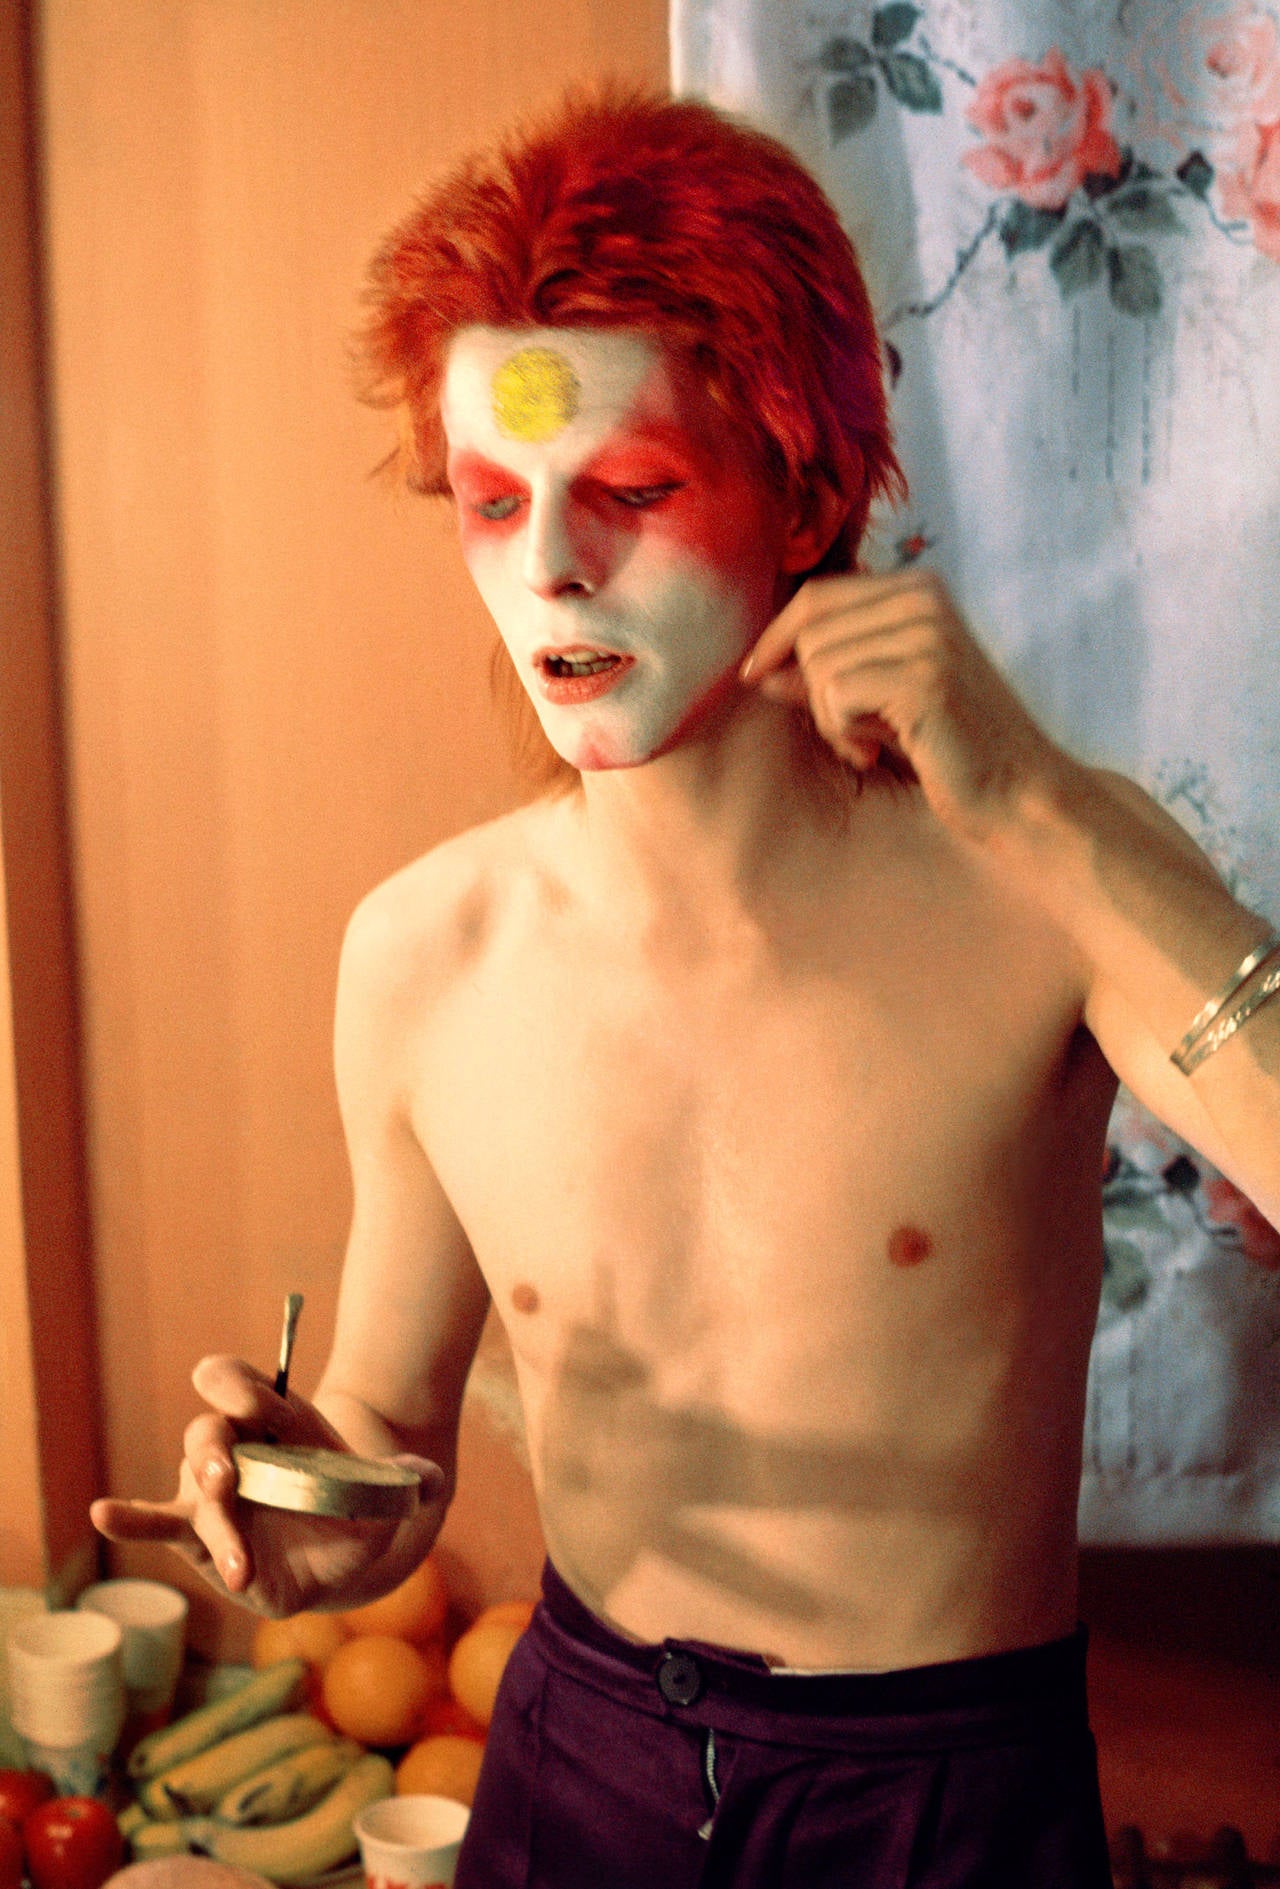 Mick Rock Figurative Photograph - Bowie Pulling off Mask